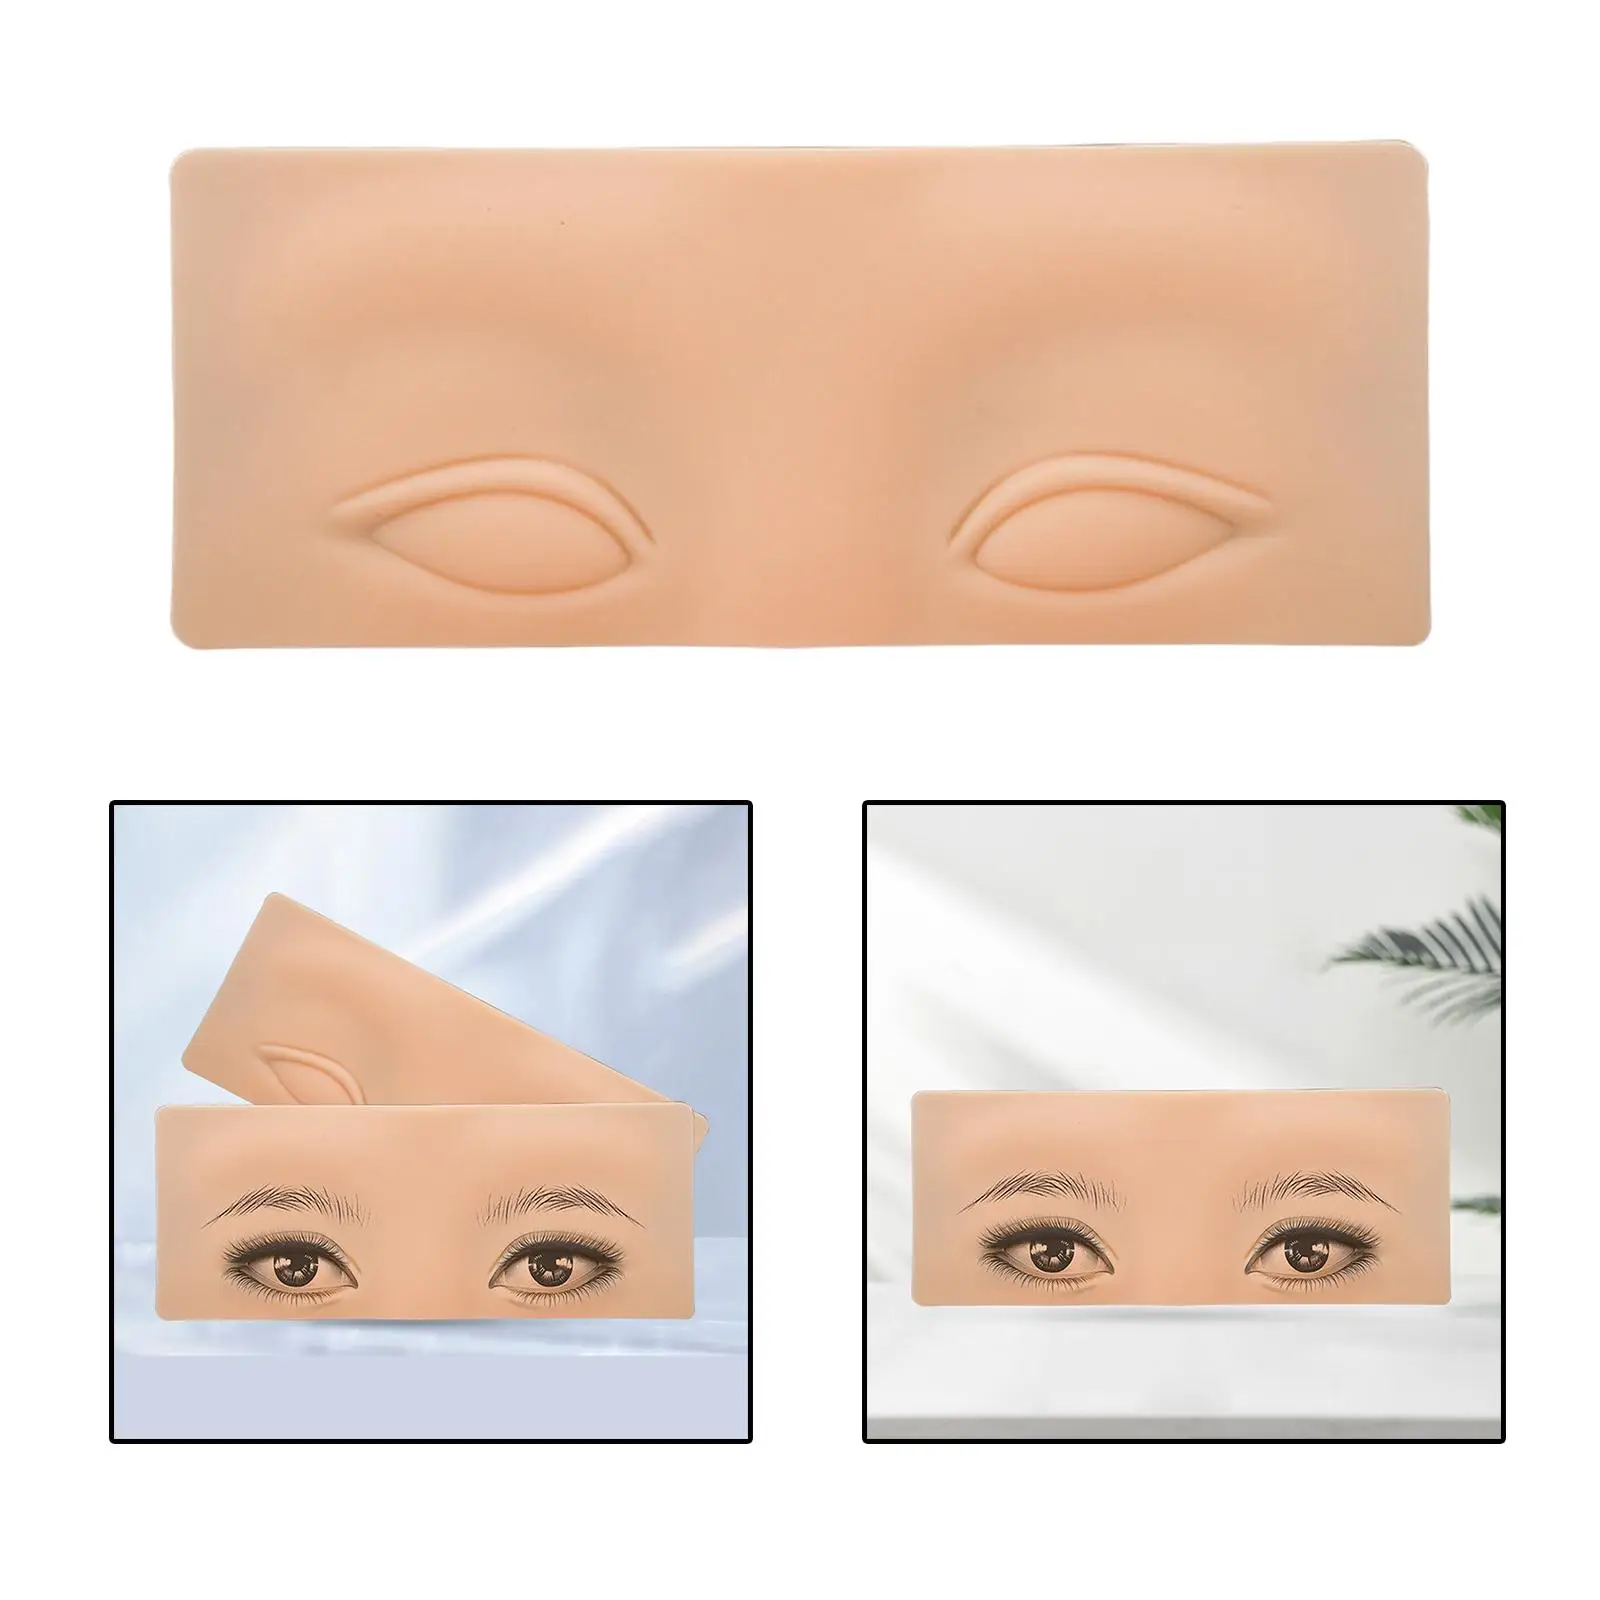 Multifunction 3D Silicone Eyebrow Eyeliner Practice Face Model Simulation training skin Practice Aid Artists Beginners